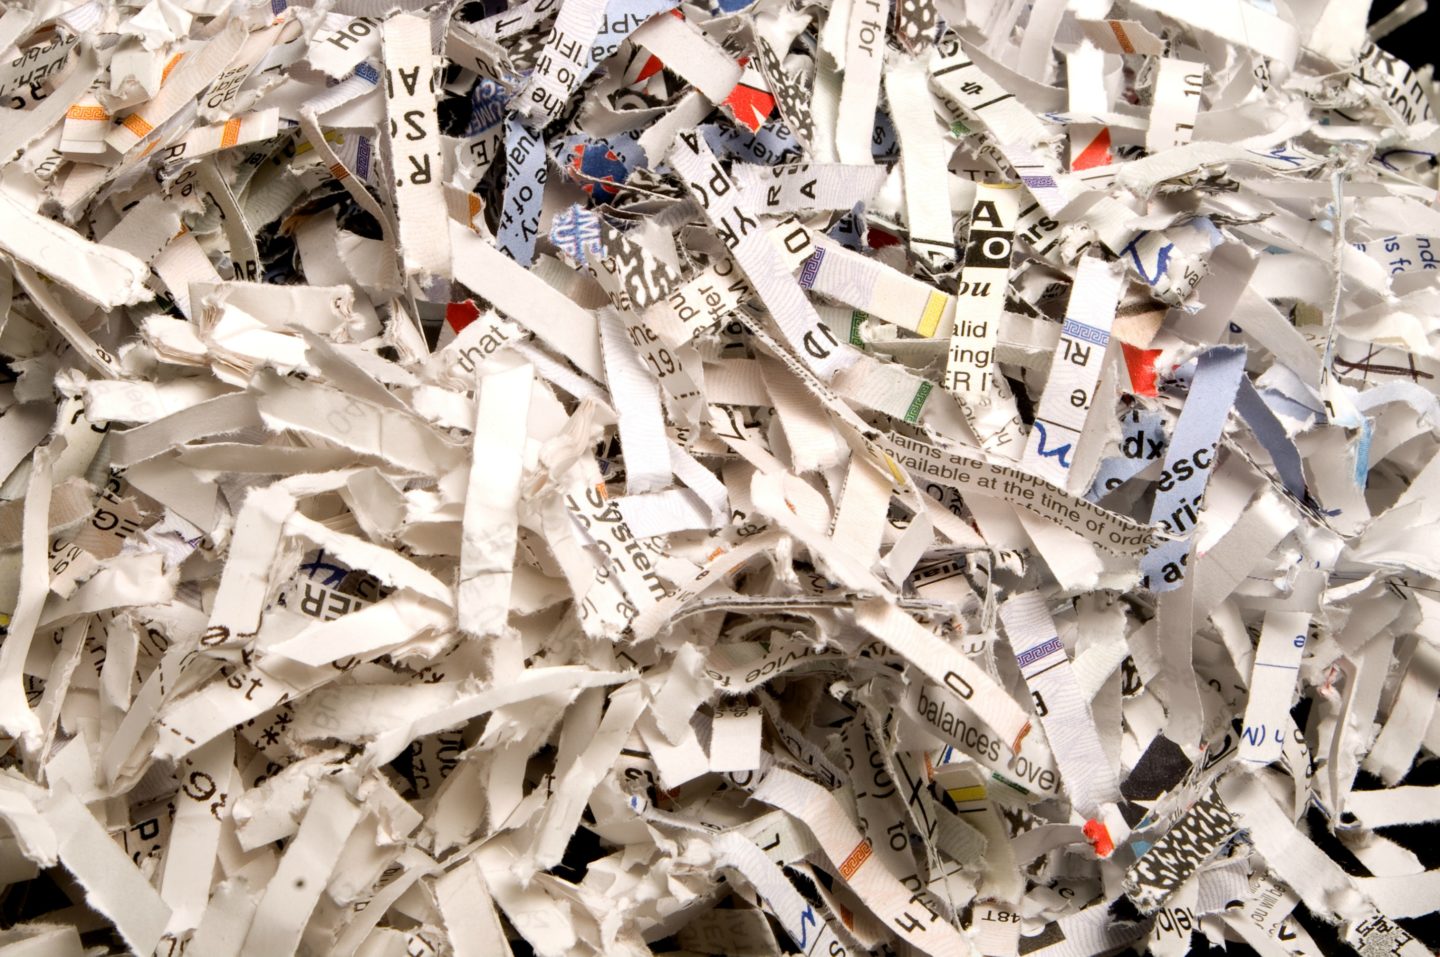 Buyer's Guide: the best shredders for home and business